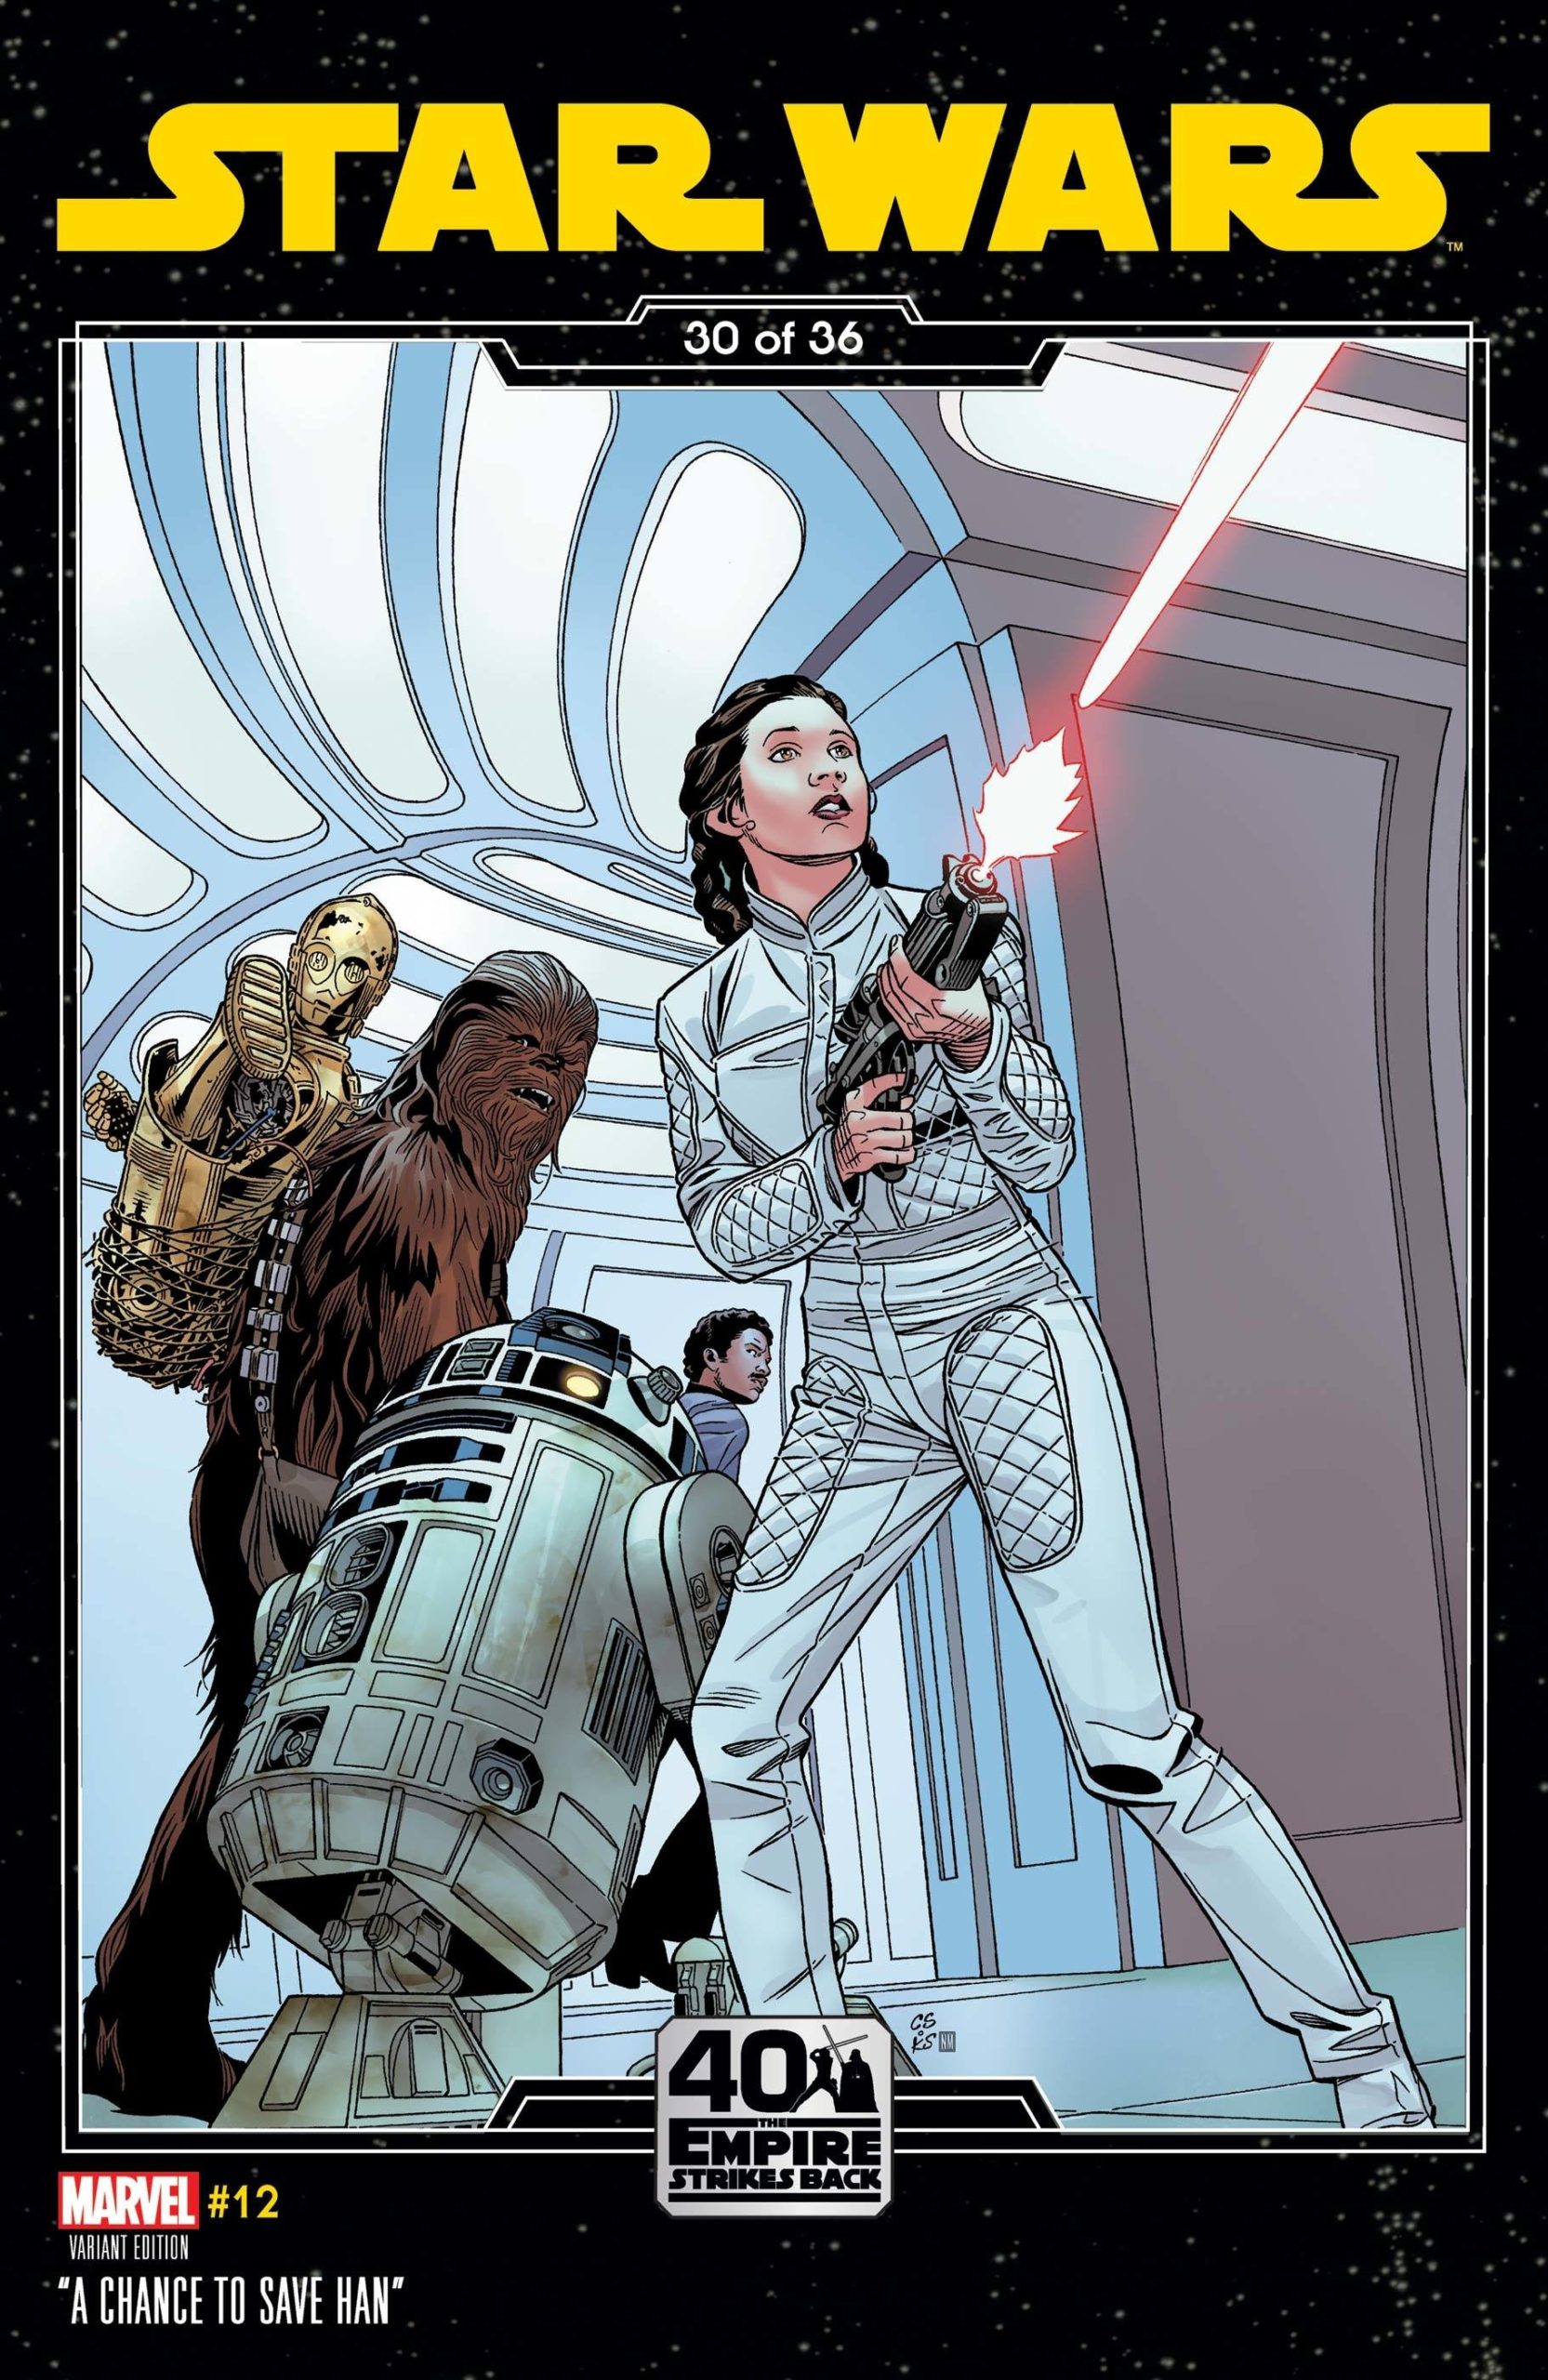 Star Wars #12 (Chris Sprouse The Empire Strikes Back Variant Cover) (10.03.2021)